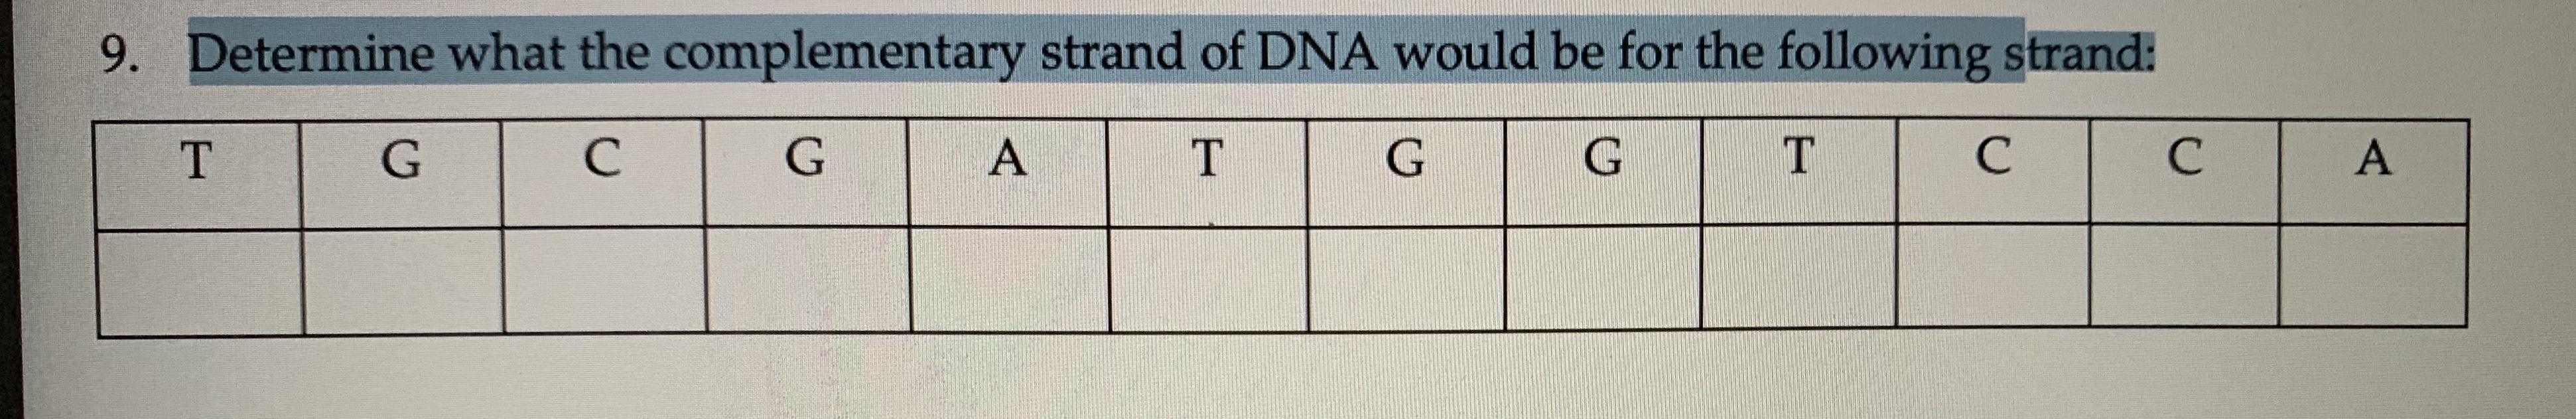 complementary dna strand calculator